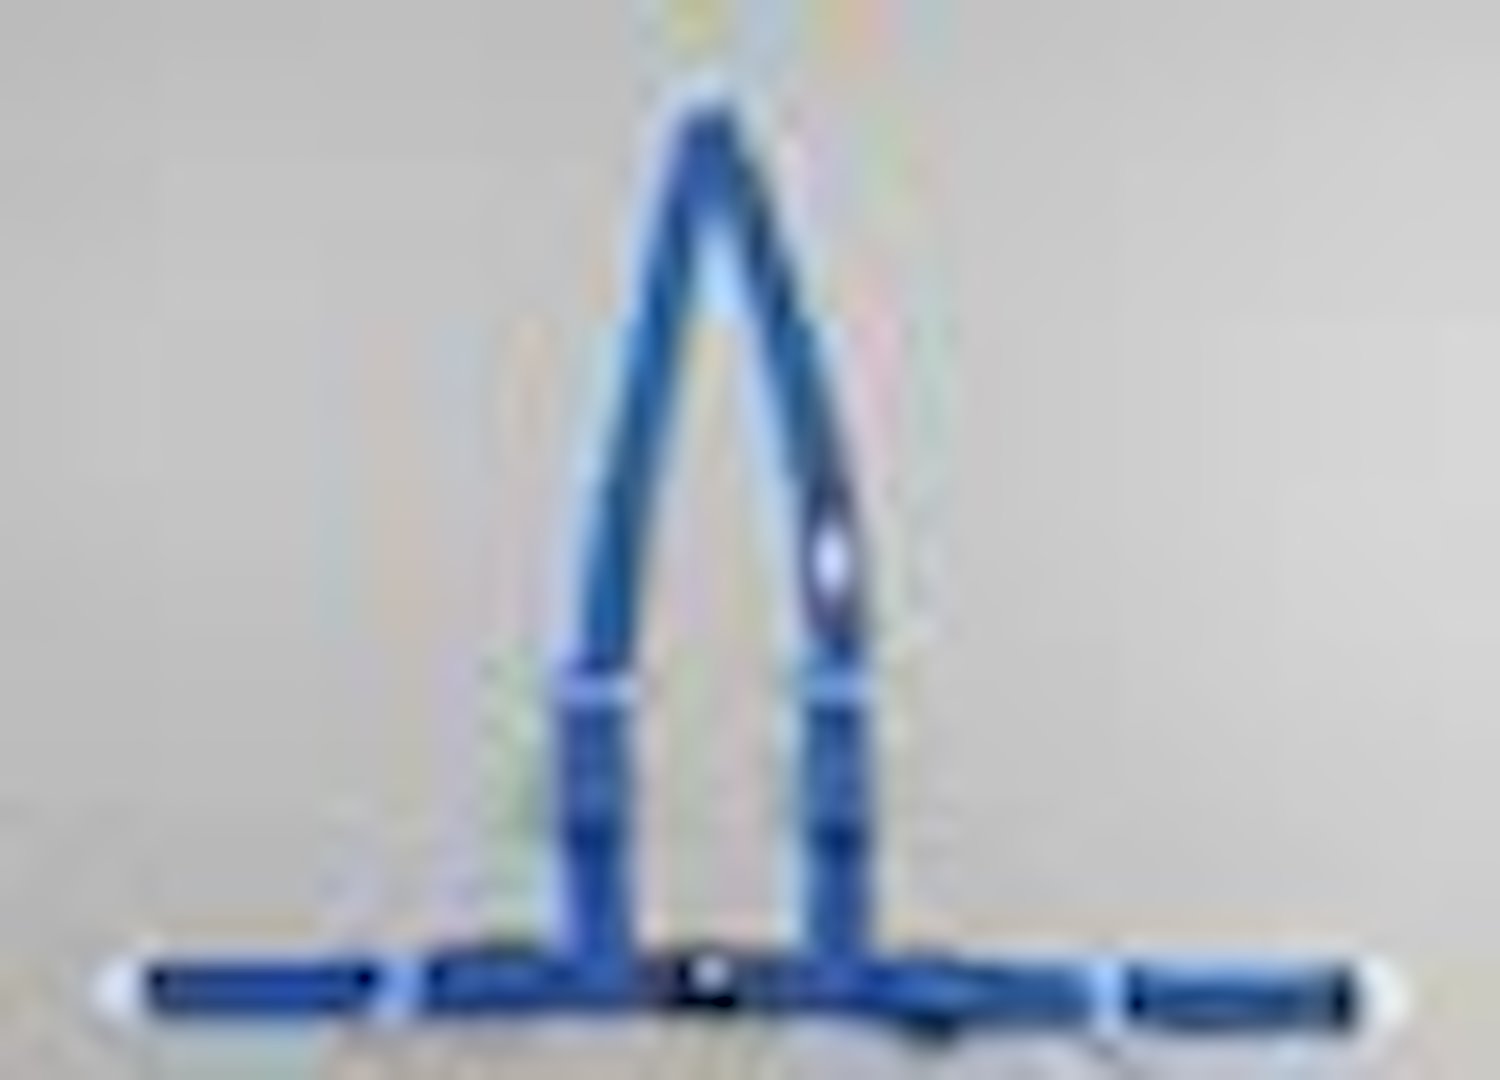 NON-SFI B&T HARNESS 2 PULL UP Lap Belt SNAP 2 S.H. INDIVIDUAL FLOOR Mount WRAP/SNAP BLUE